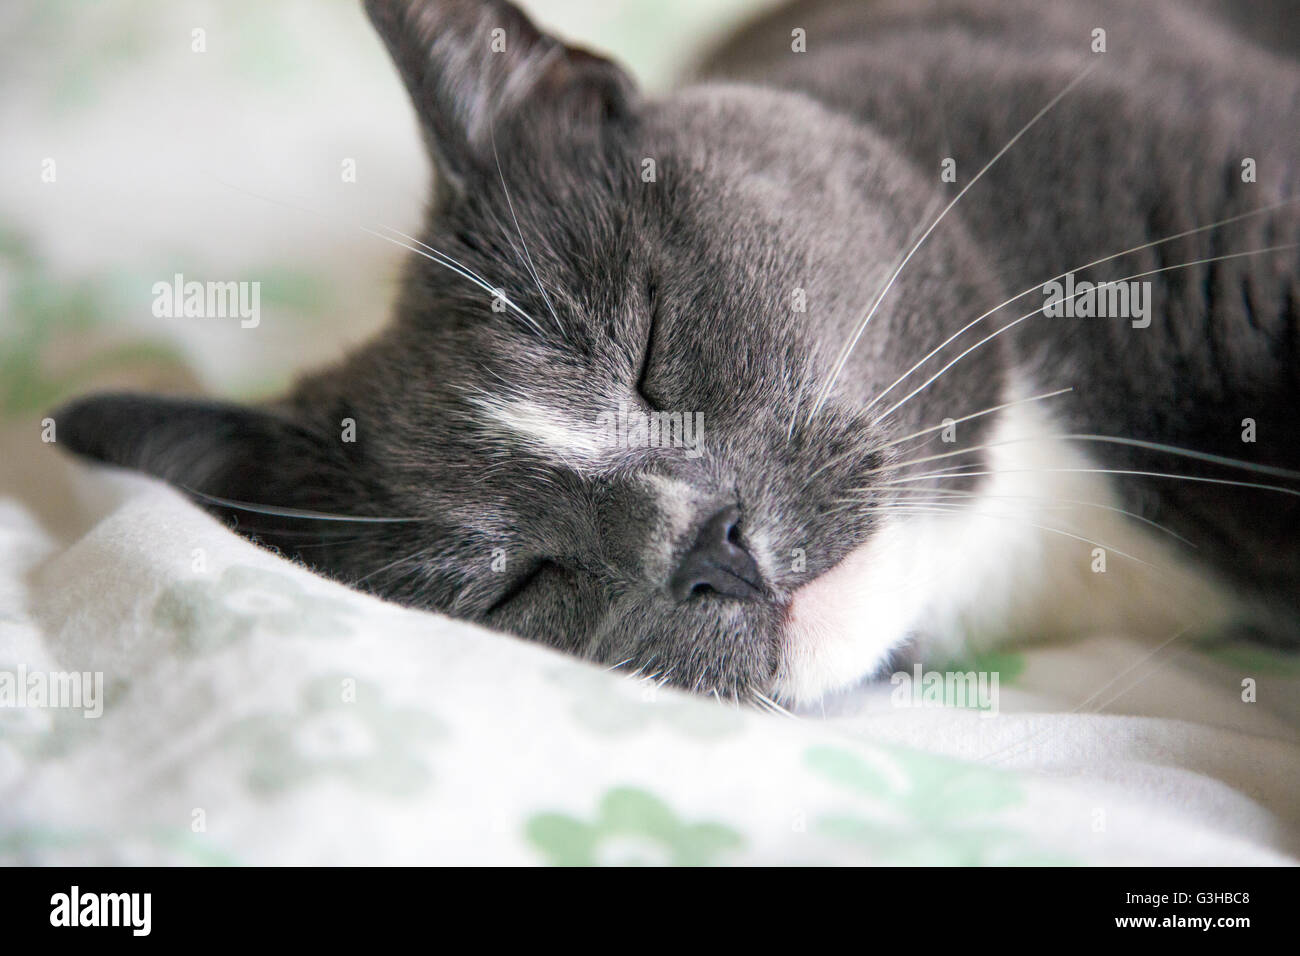 Close-up of a cat sleeping in bed Banque D'Images